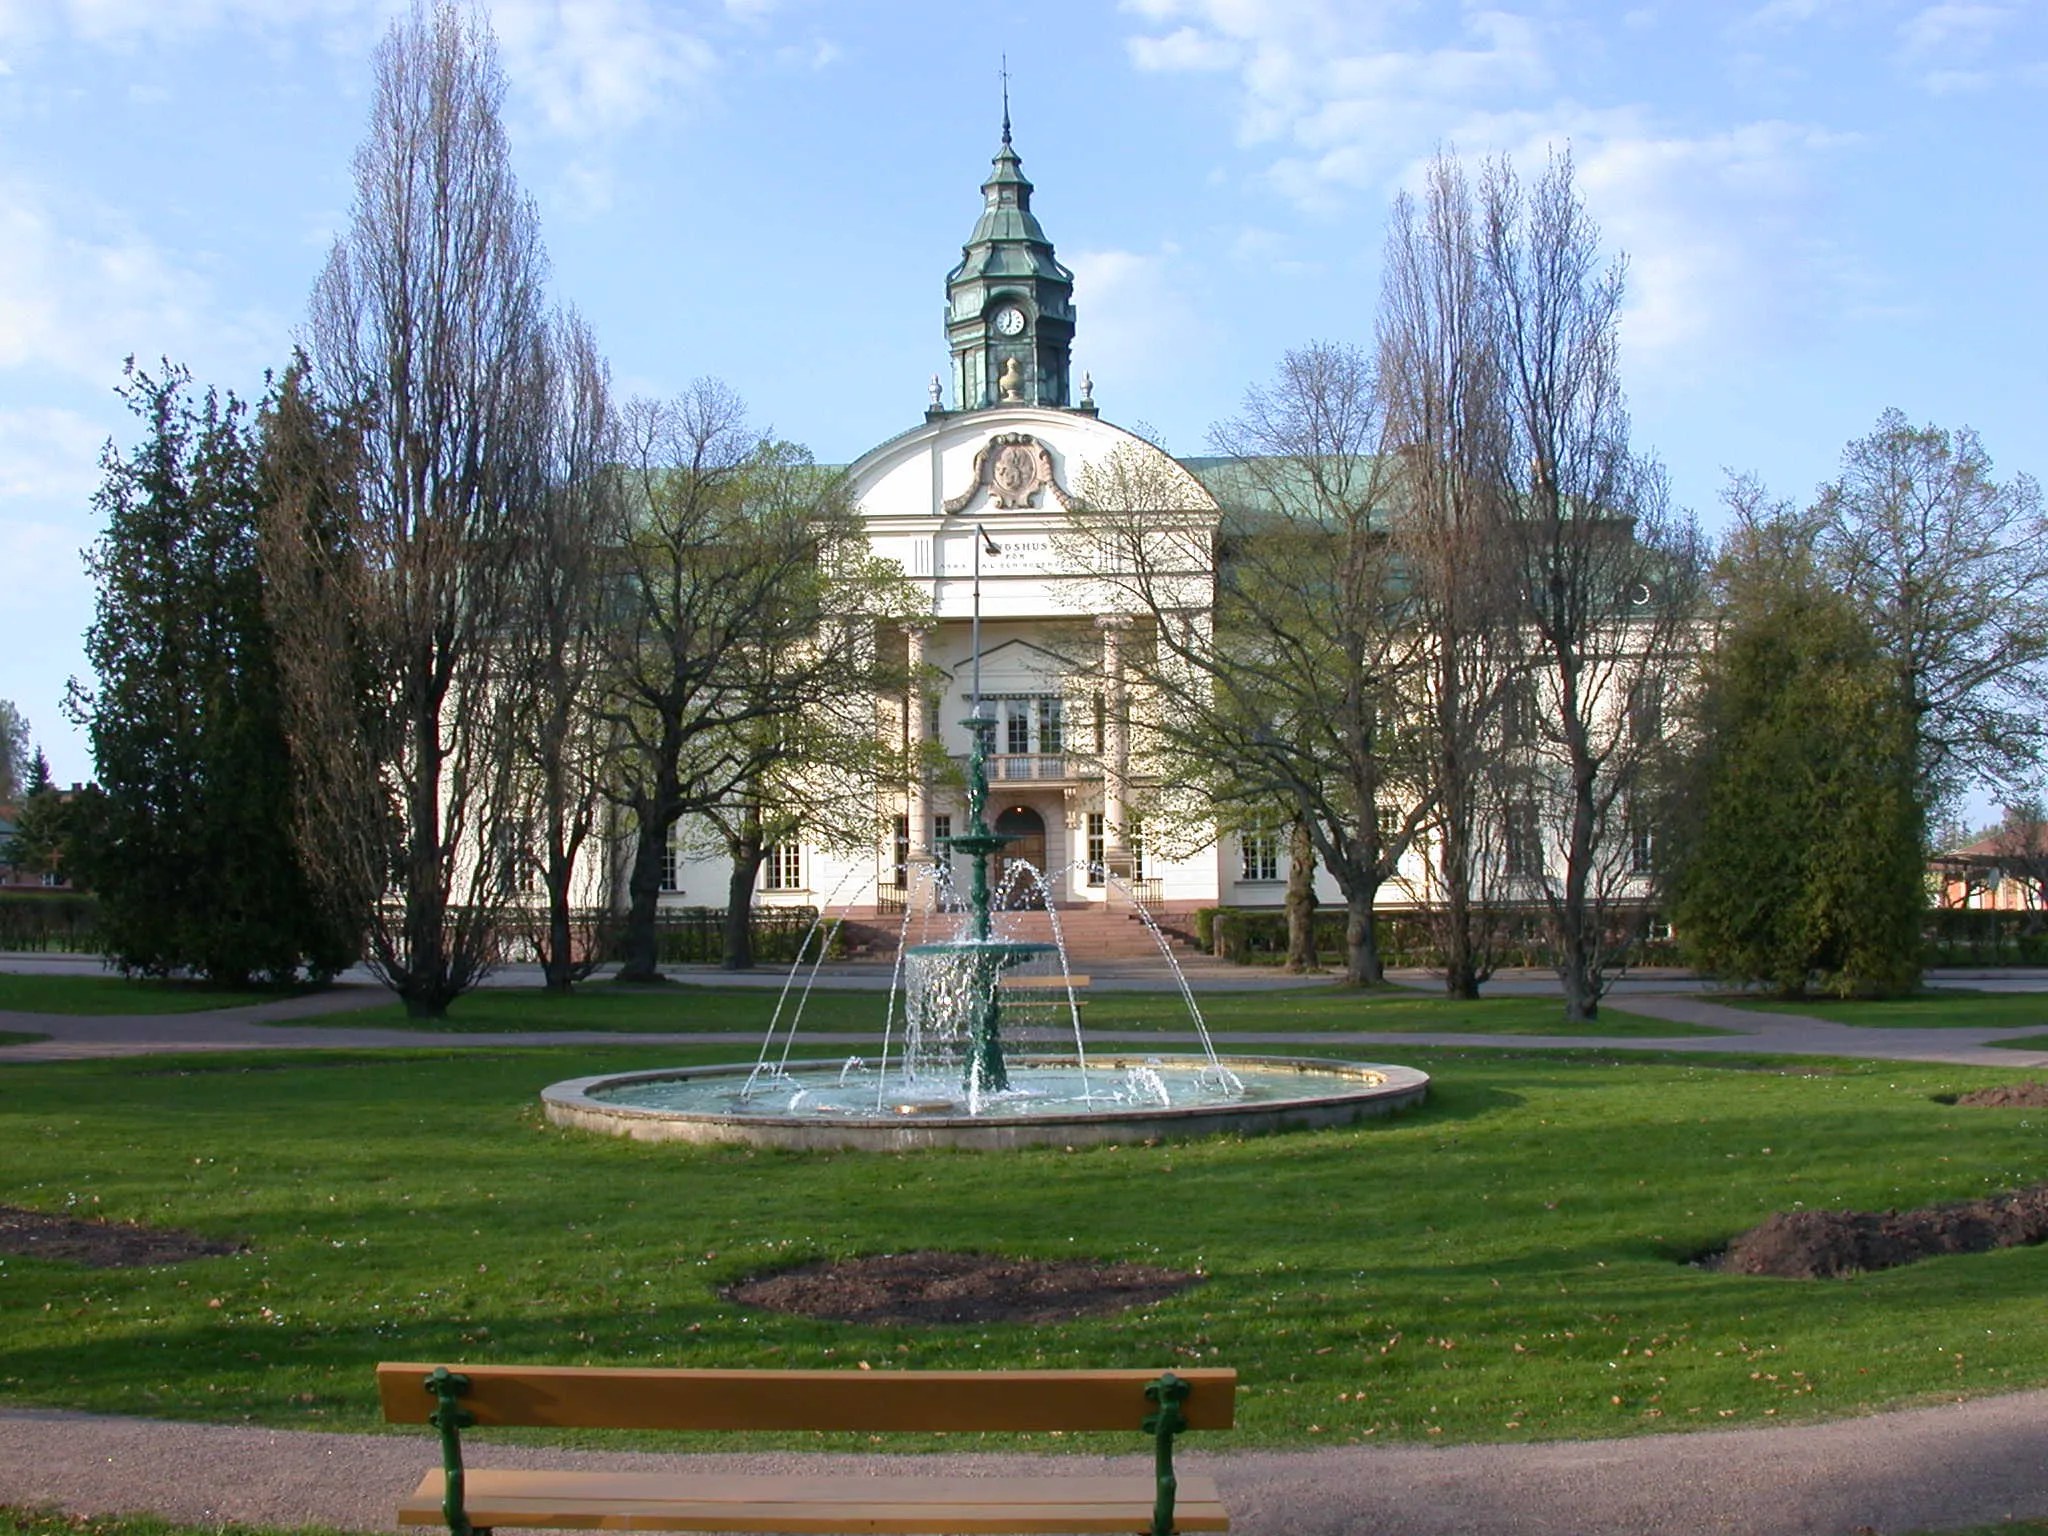 Photo showing: The old court house in Motala, Sweden. Photo by Riggwelter, May 10, 2006.